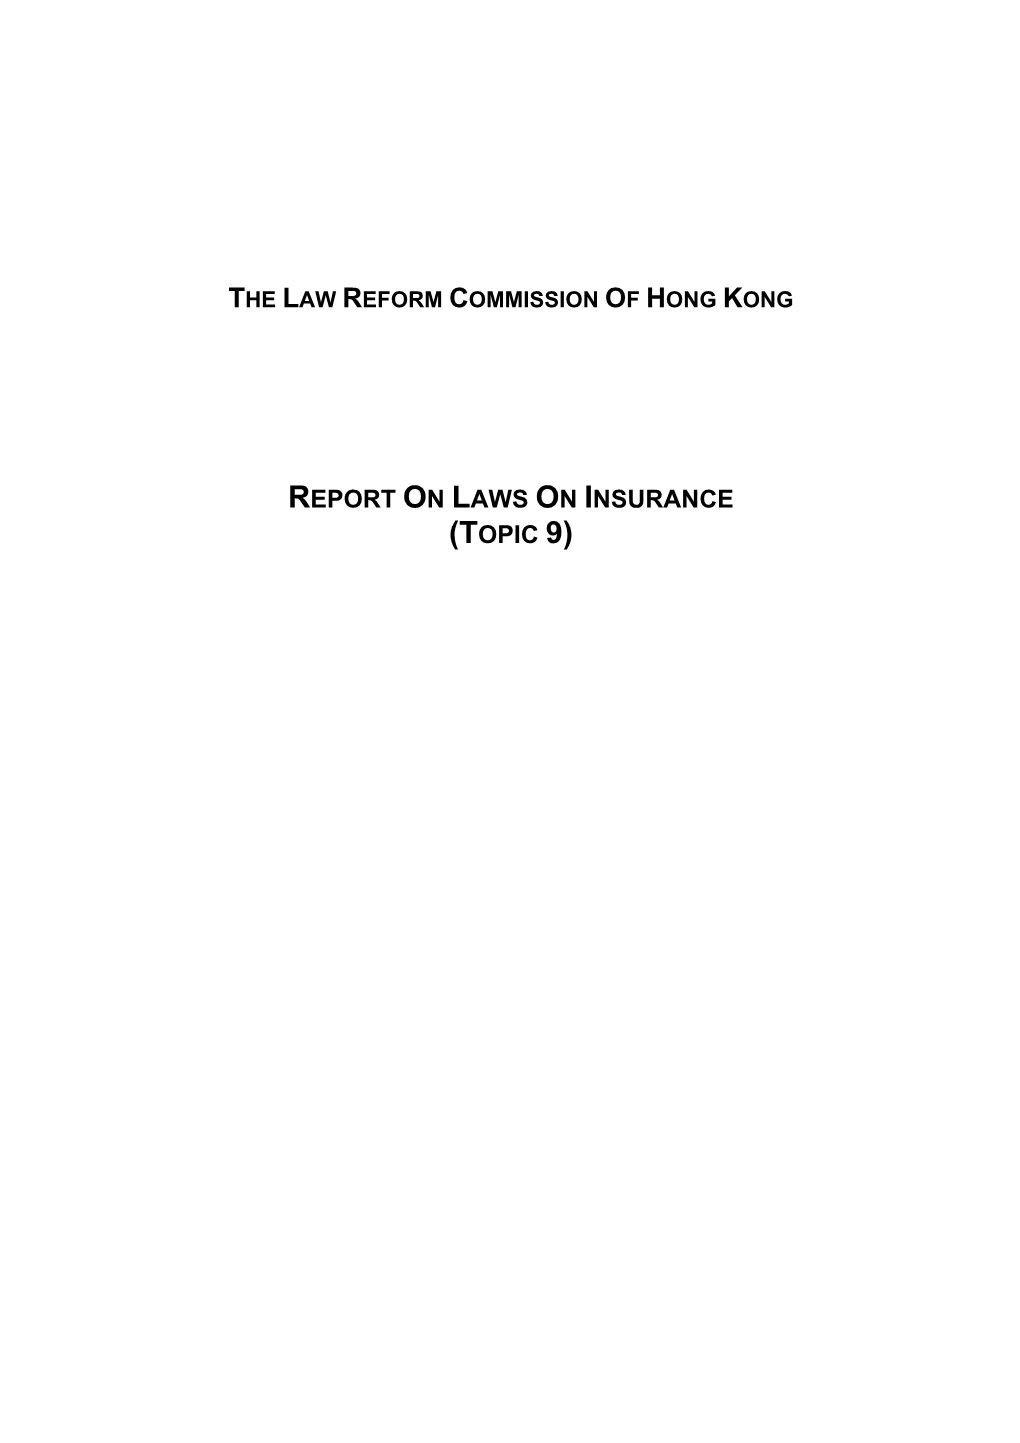 Report on Laws on Insurance (Topic 9)